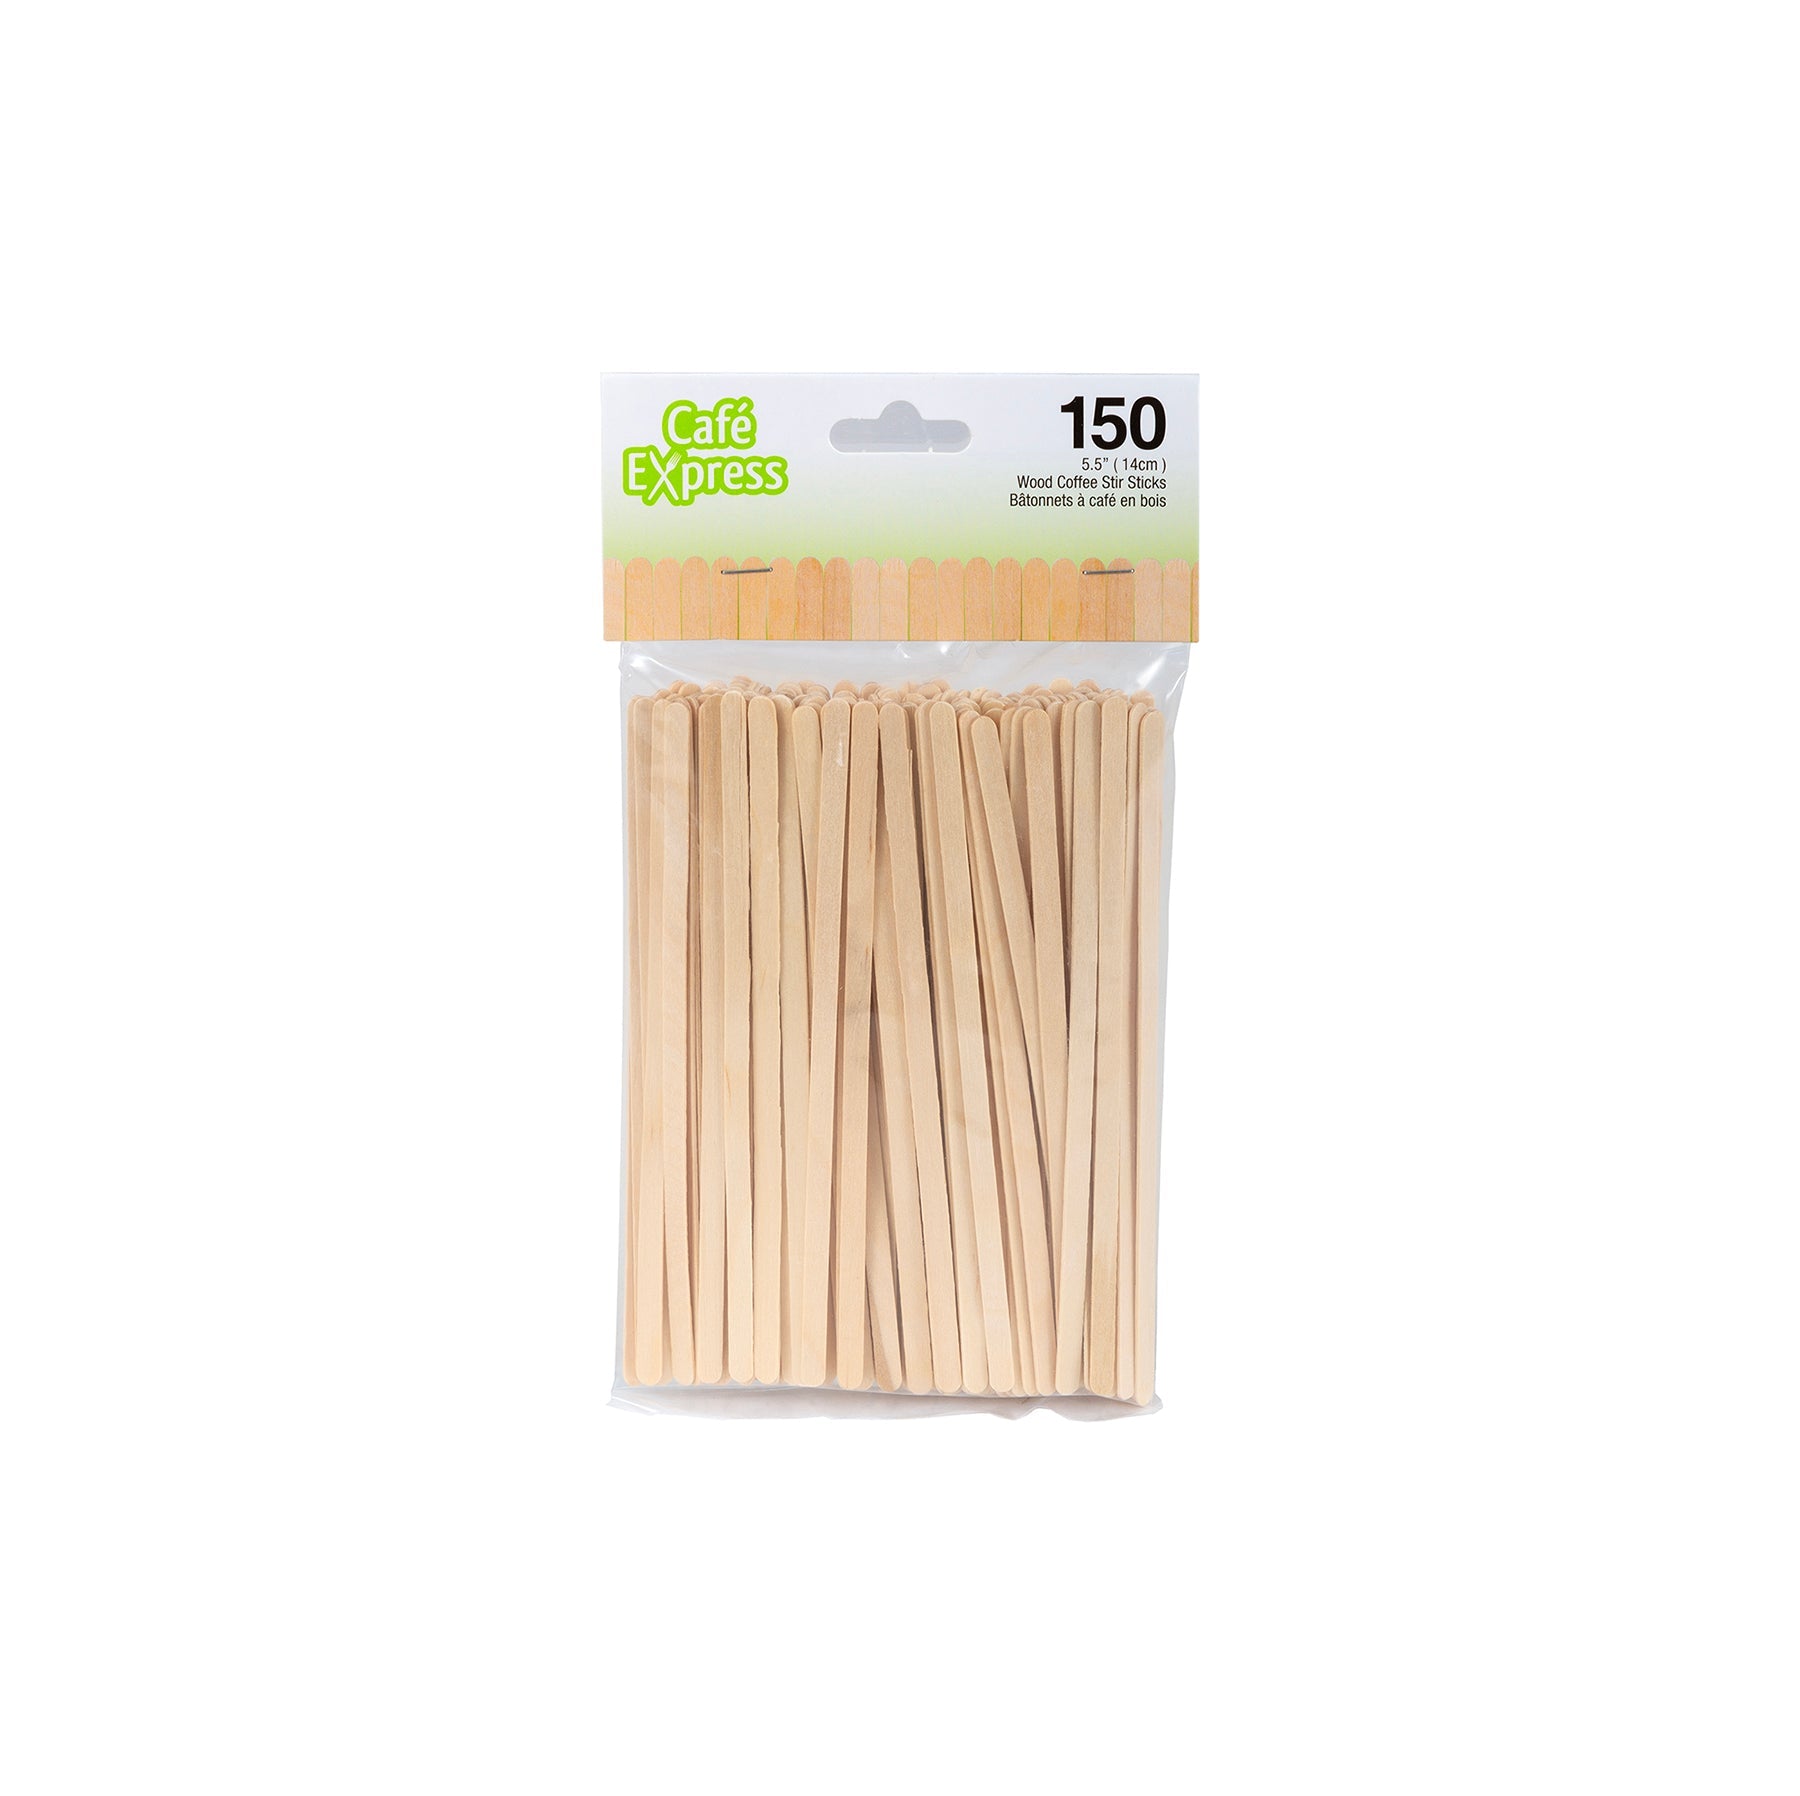 Cafe Express 150 Wooden Coffee Sticks 5.5in